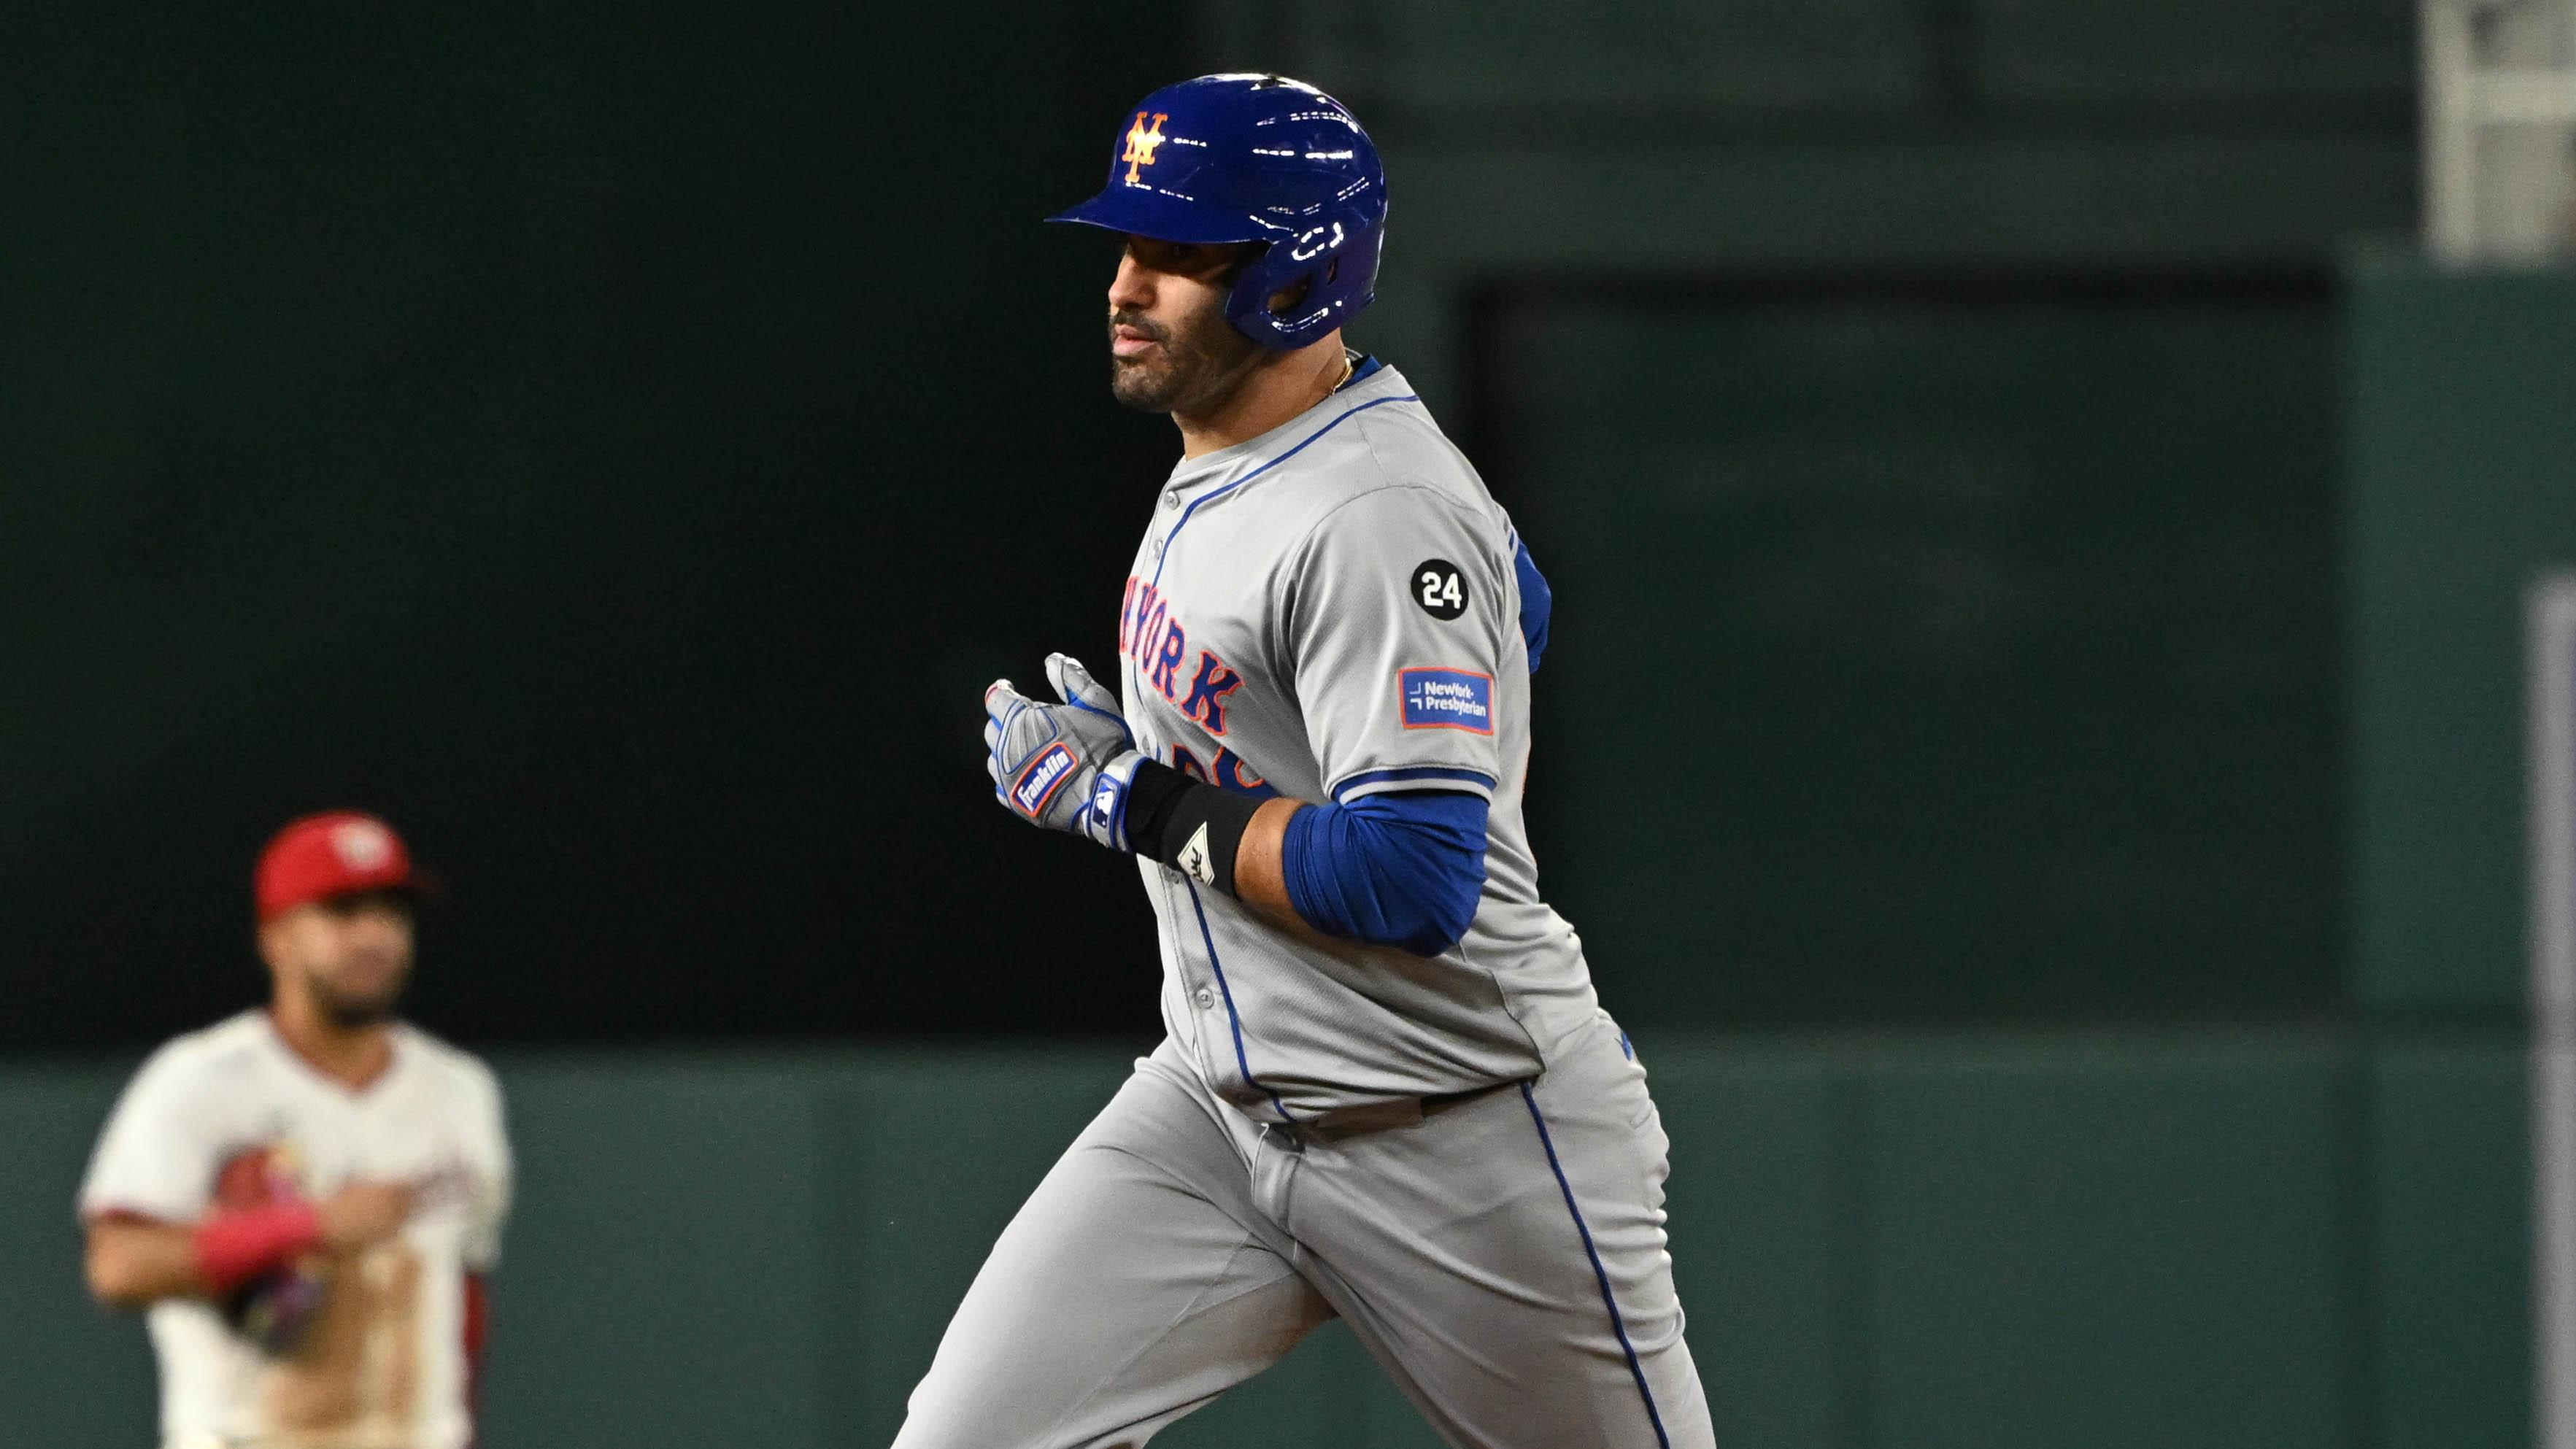 J.D. Martinez returns to Mets' lineup after missing Tuesday's game with sore ankle